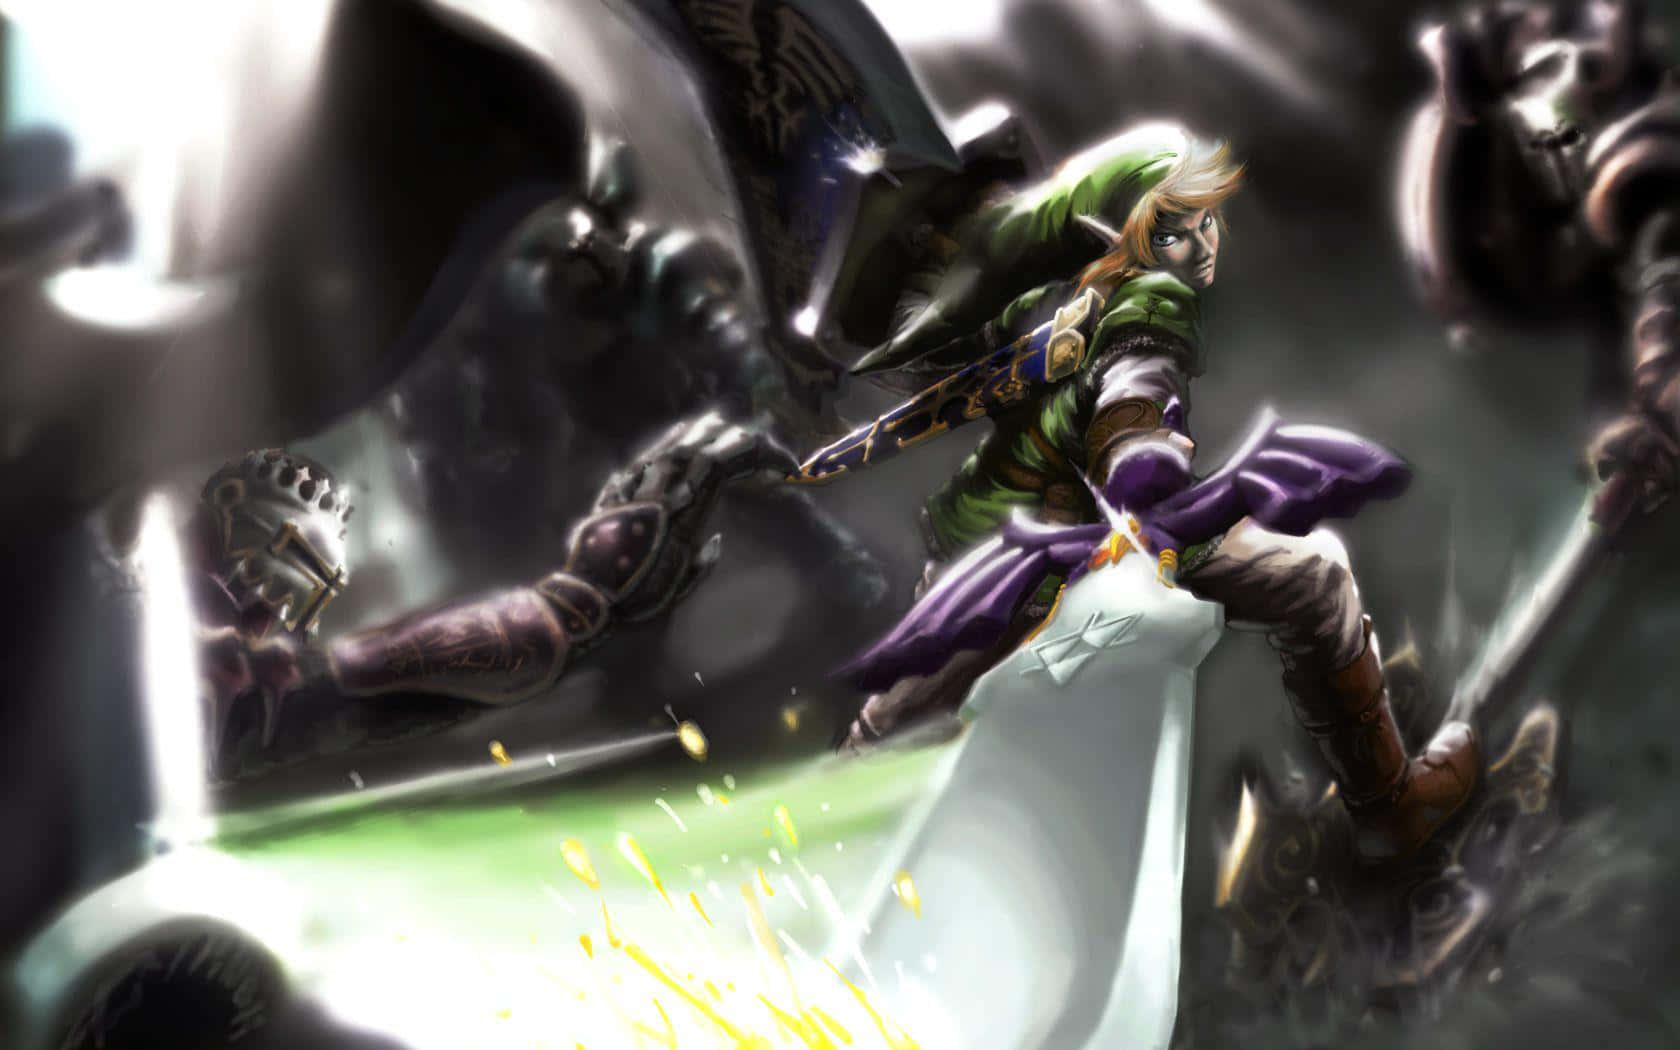 Link Embracing Midna In A Loving Embrace, From The Hit Video Game, The Legend Of Zelda: Twilight Princess. Wallpaper